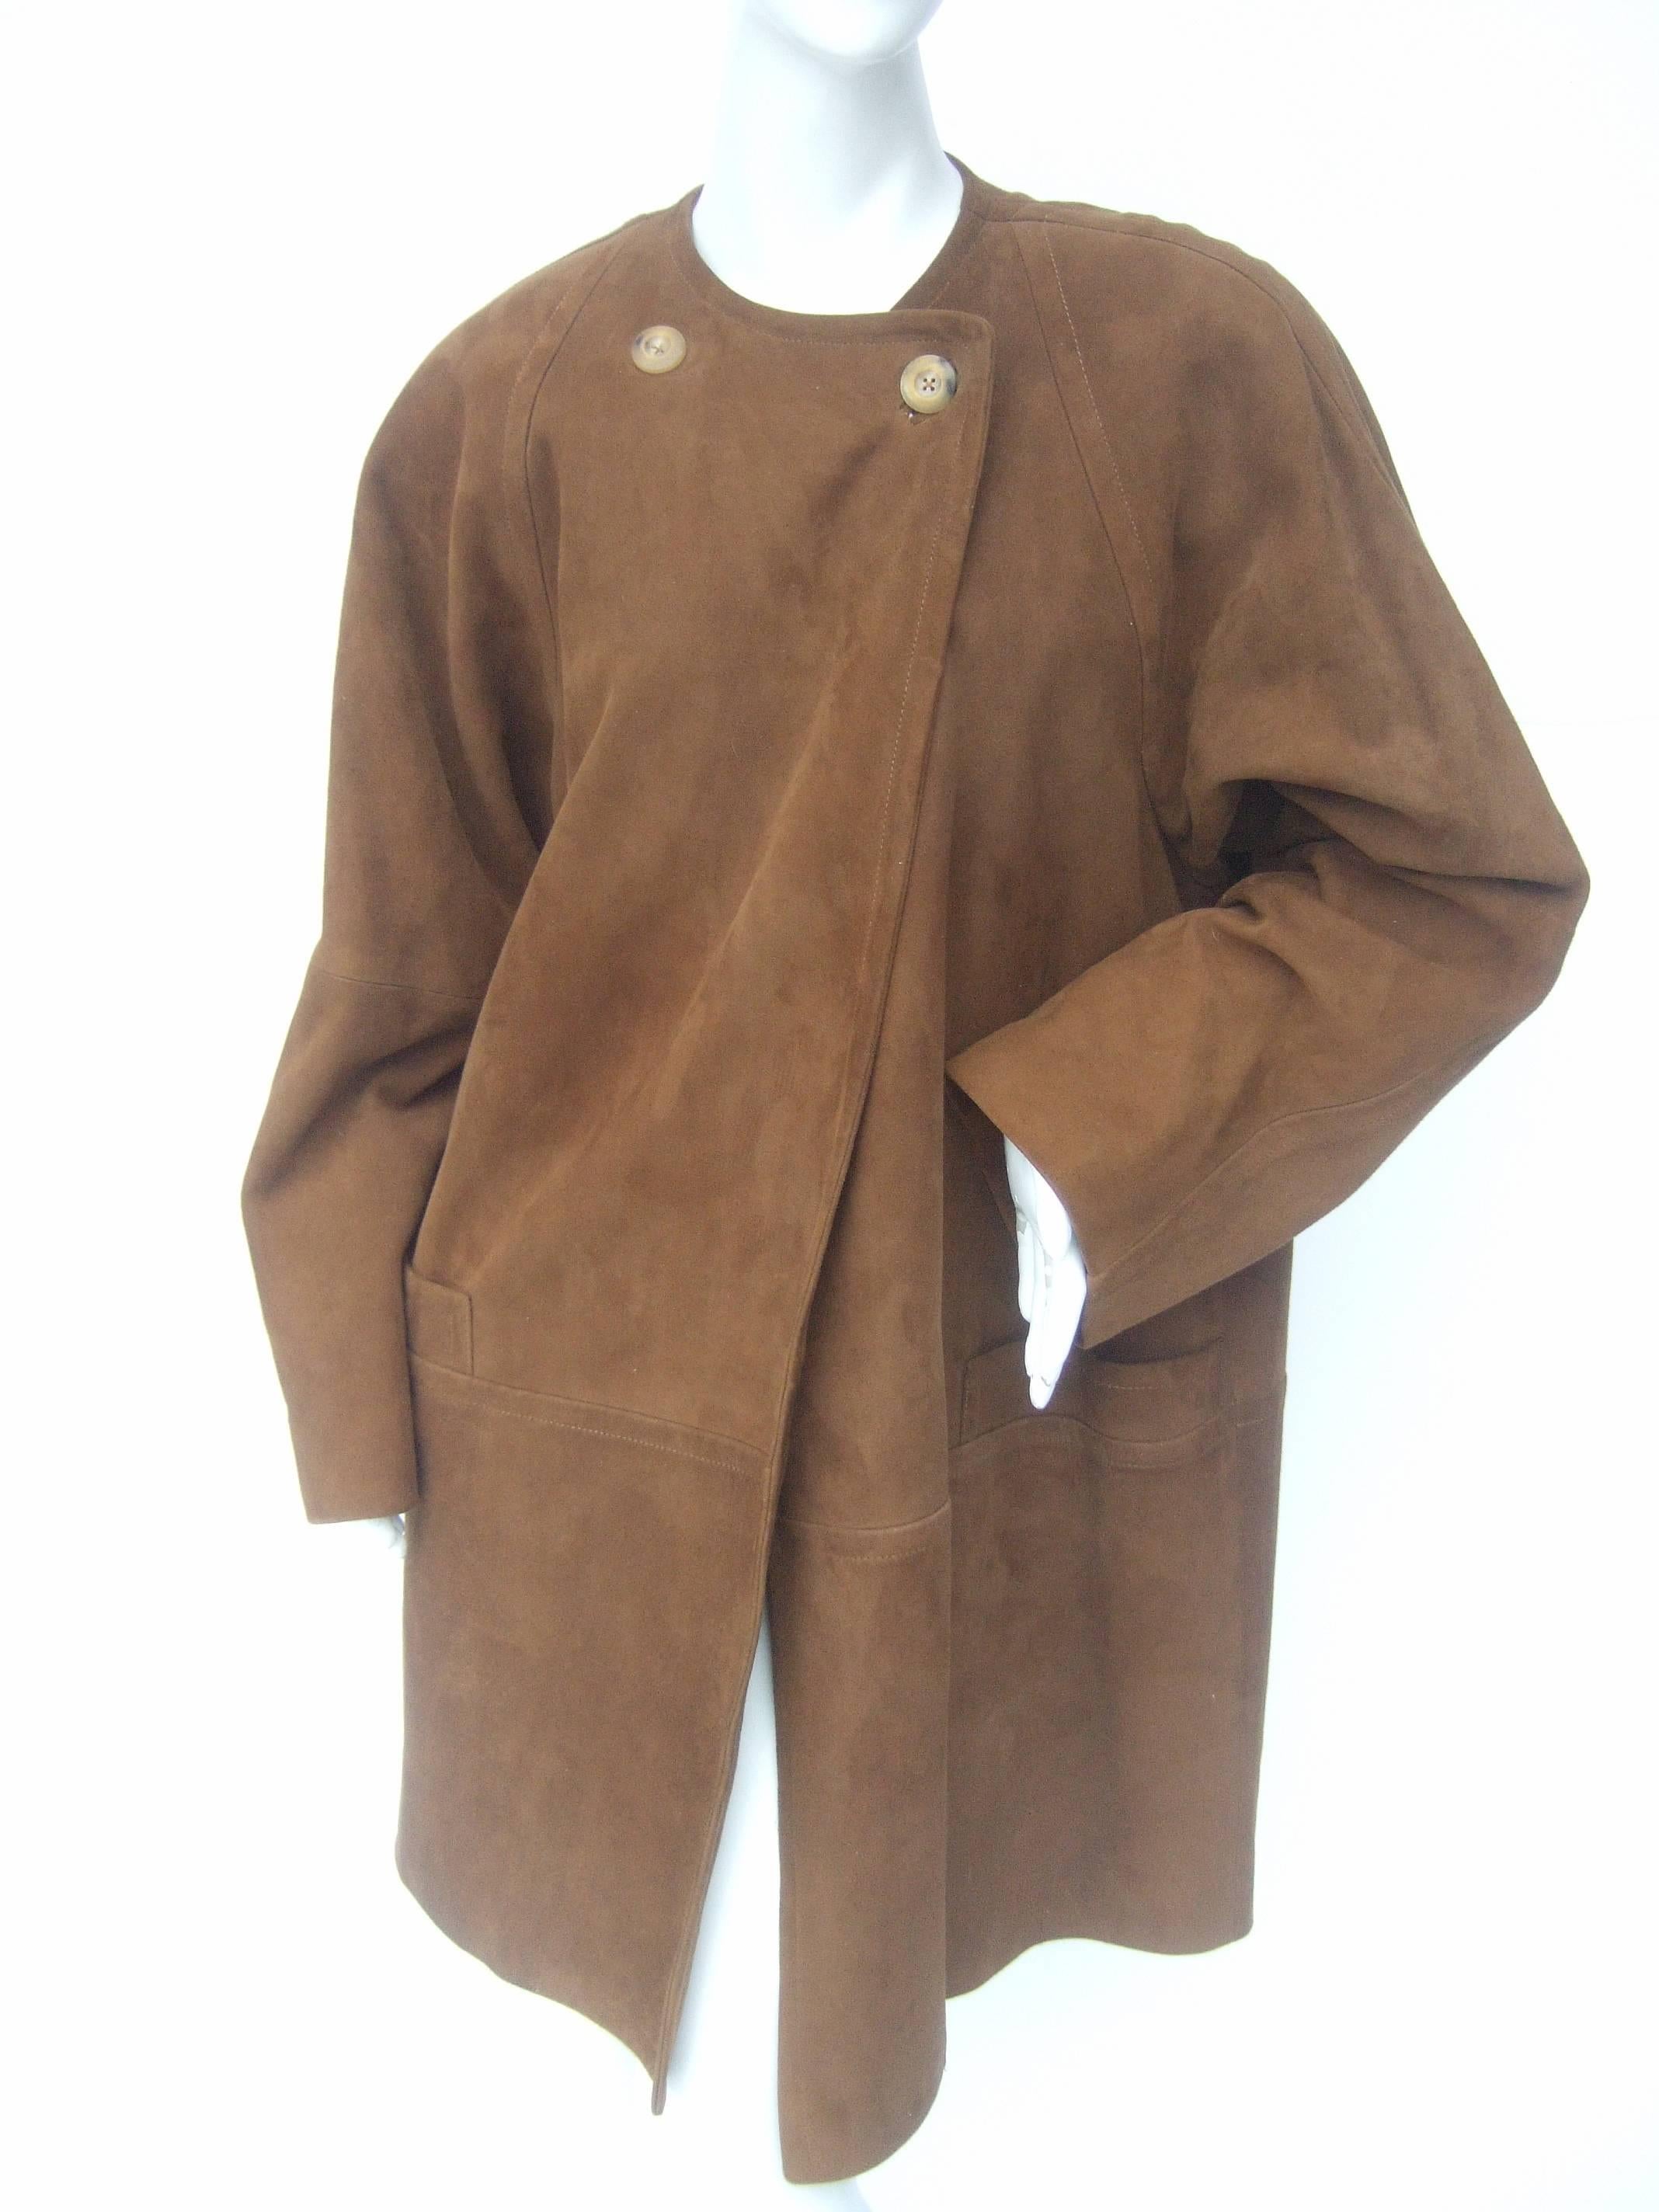 Jaeger Stylish brown doeskin suede duster coat
The classic light weight coat is designed with 
plush suede. The neckline has a pair of lucite
horn style buttons that exclusively secure
the coat. The lower front section remains
loose and does